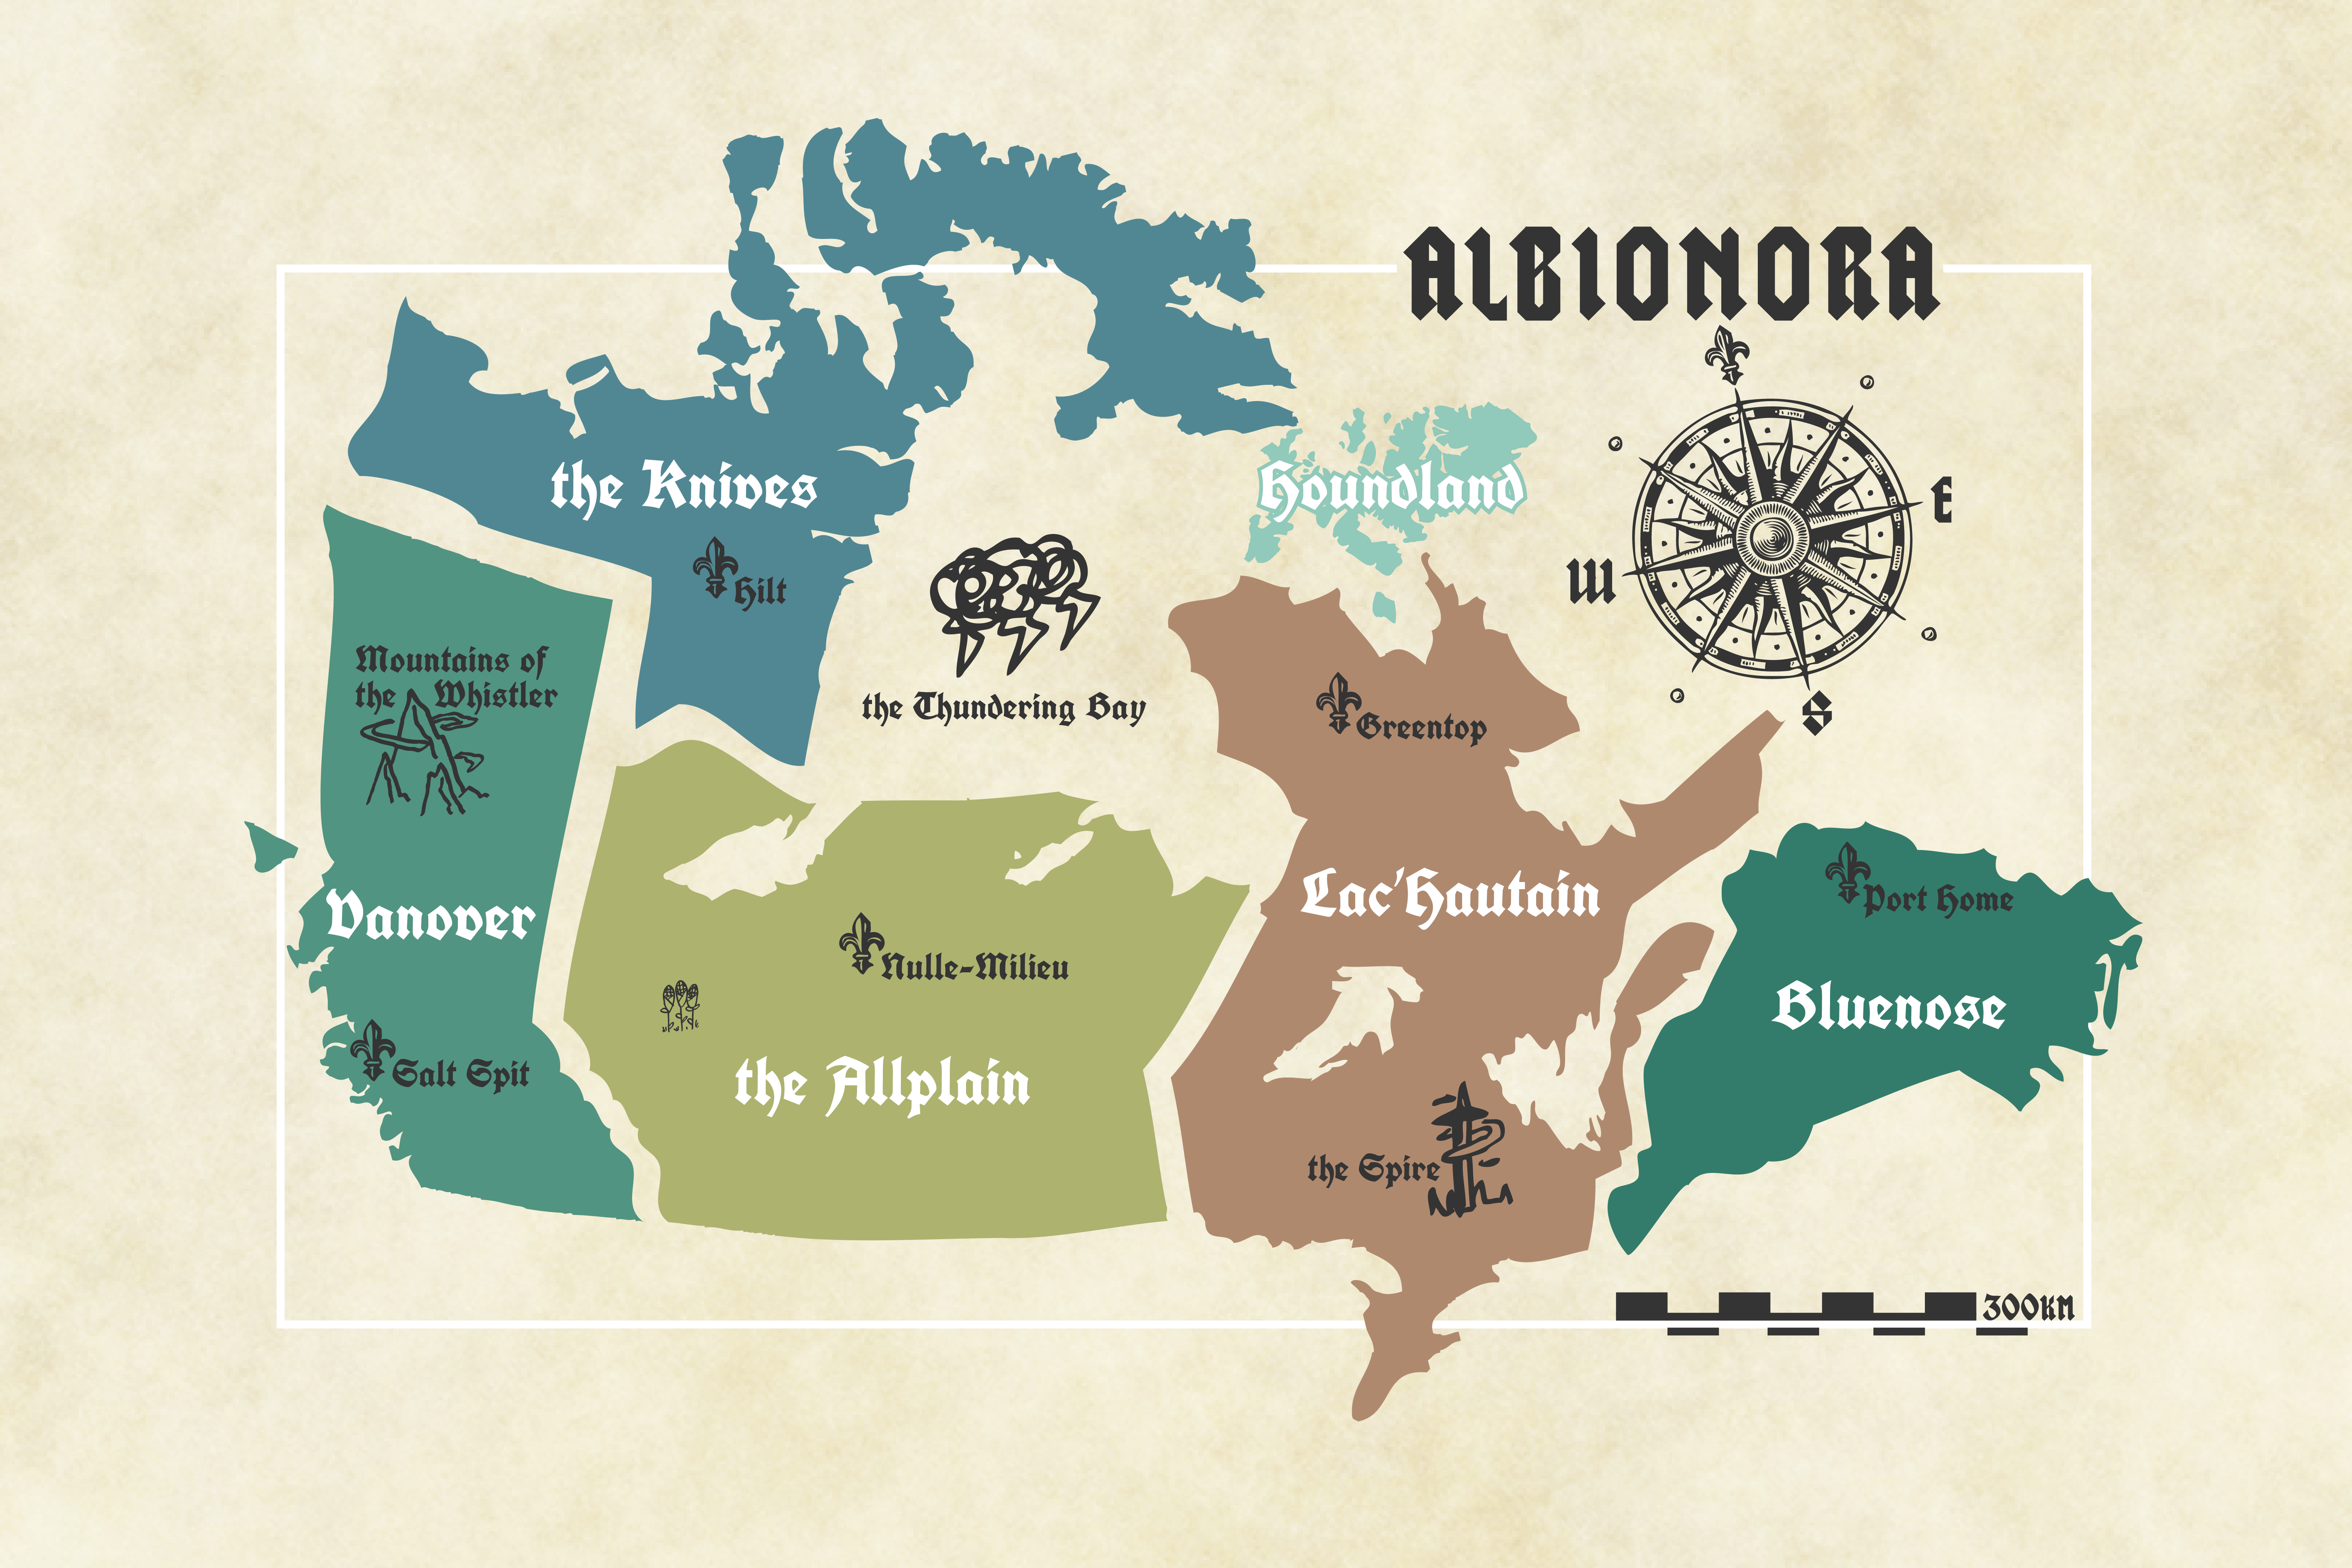 Map of Albionora